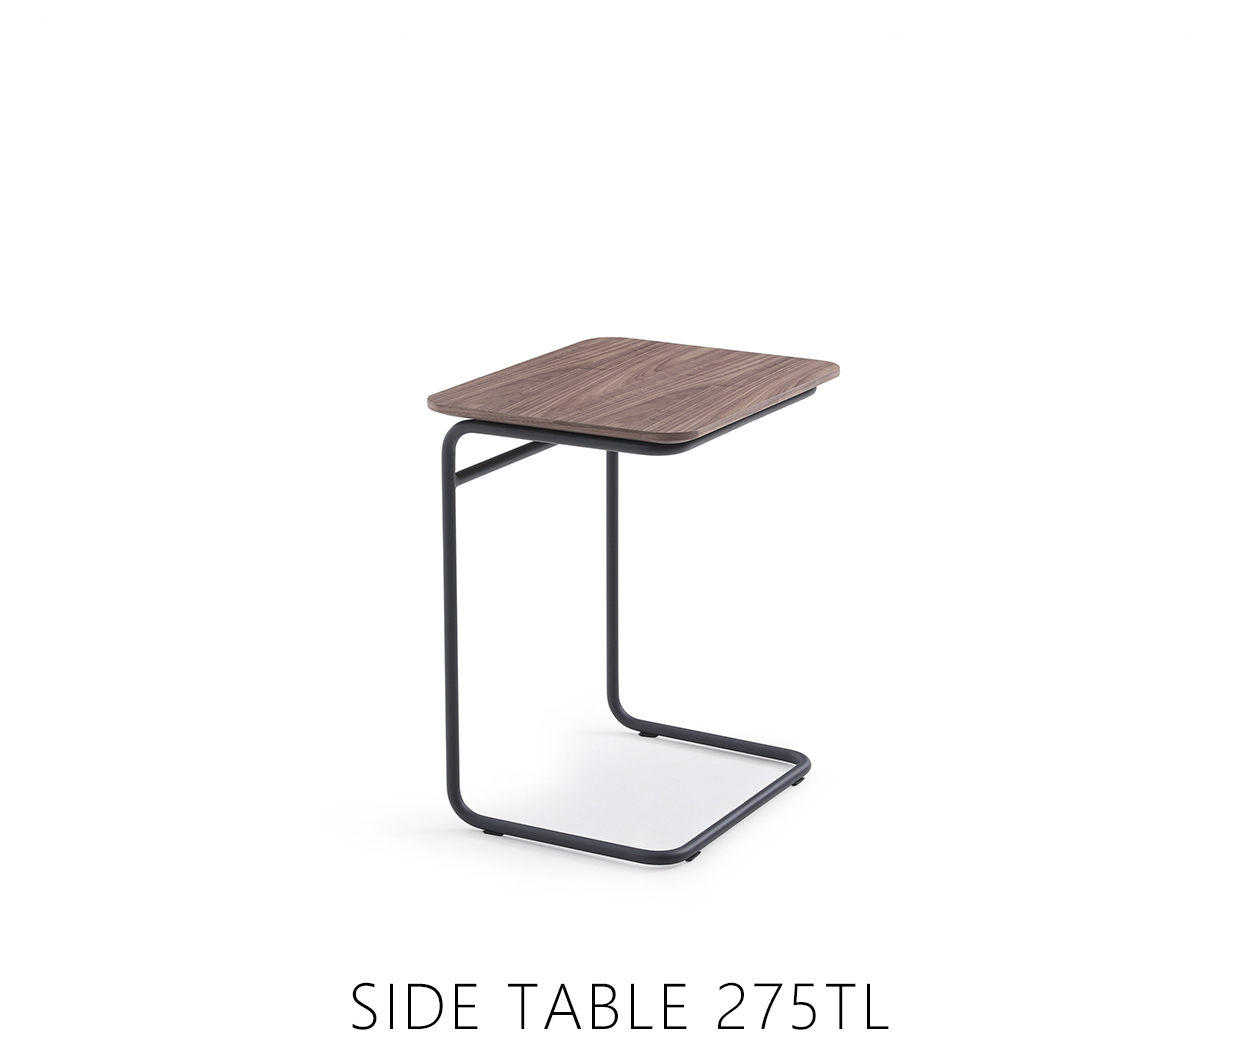 SIDE TABLE 275TL